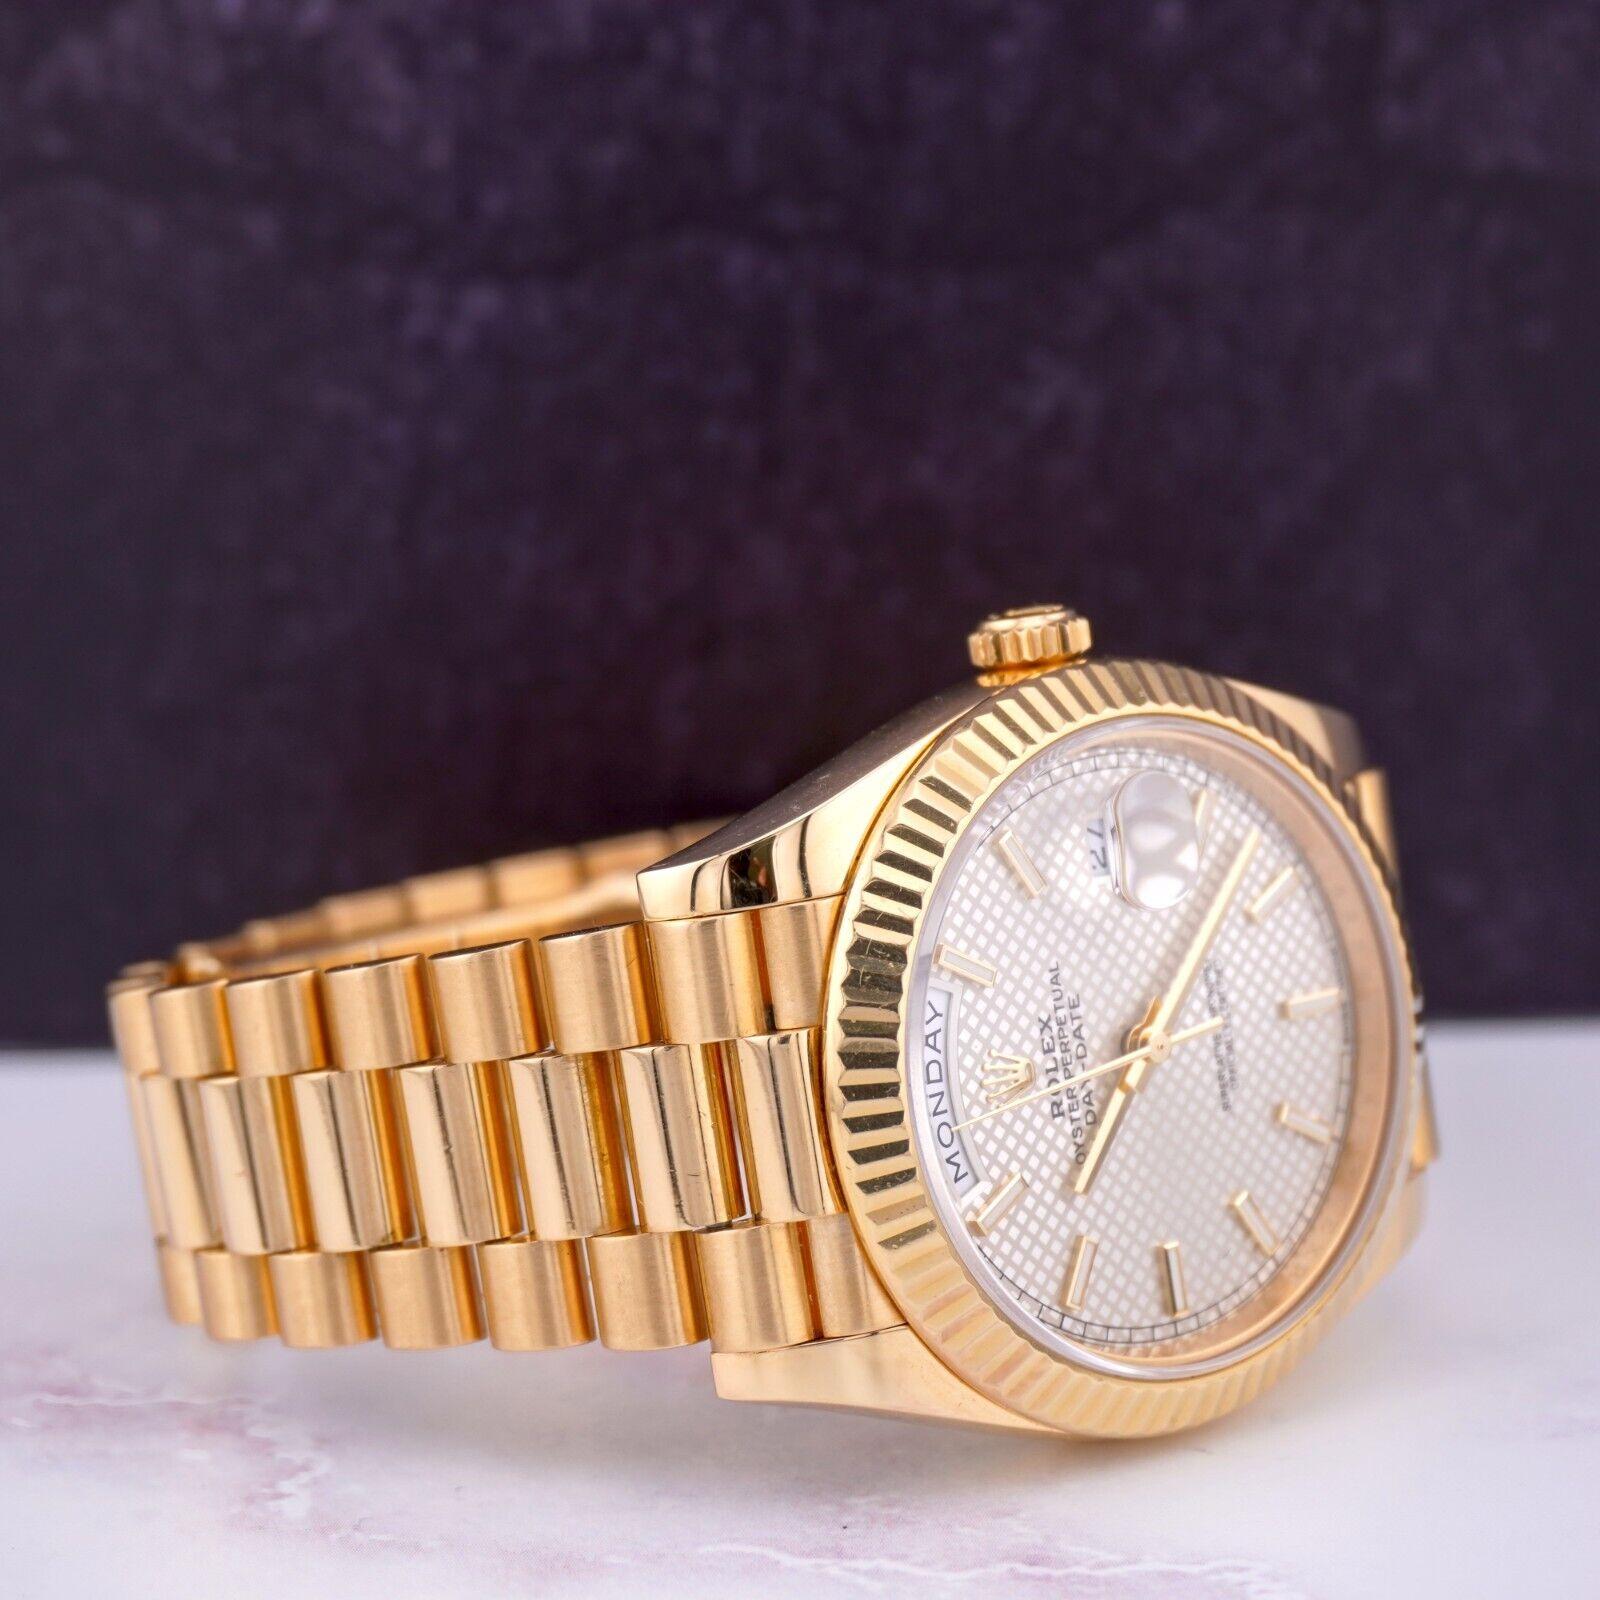 Rolex Day-Date 40 President 18k Yellow Gold Men's Watch Silver Motif DIAL 228238 In Excellent Condition For Sale In Pleasanton, CA